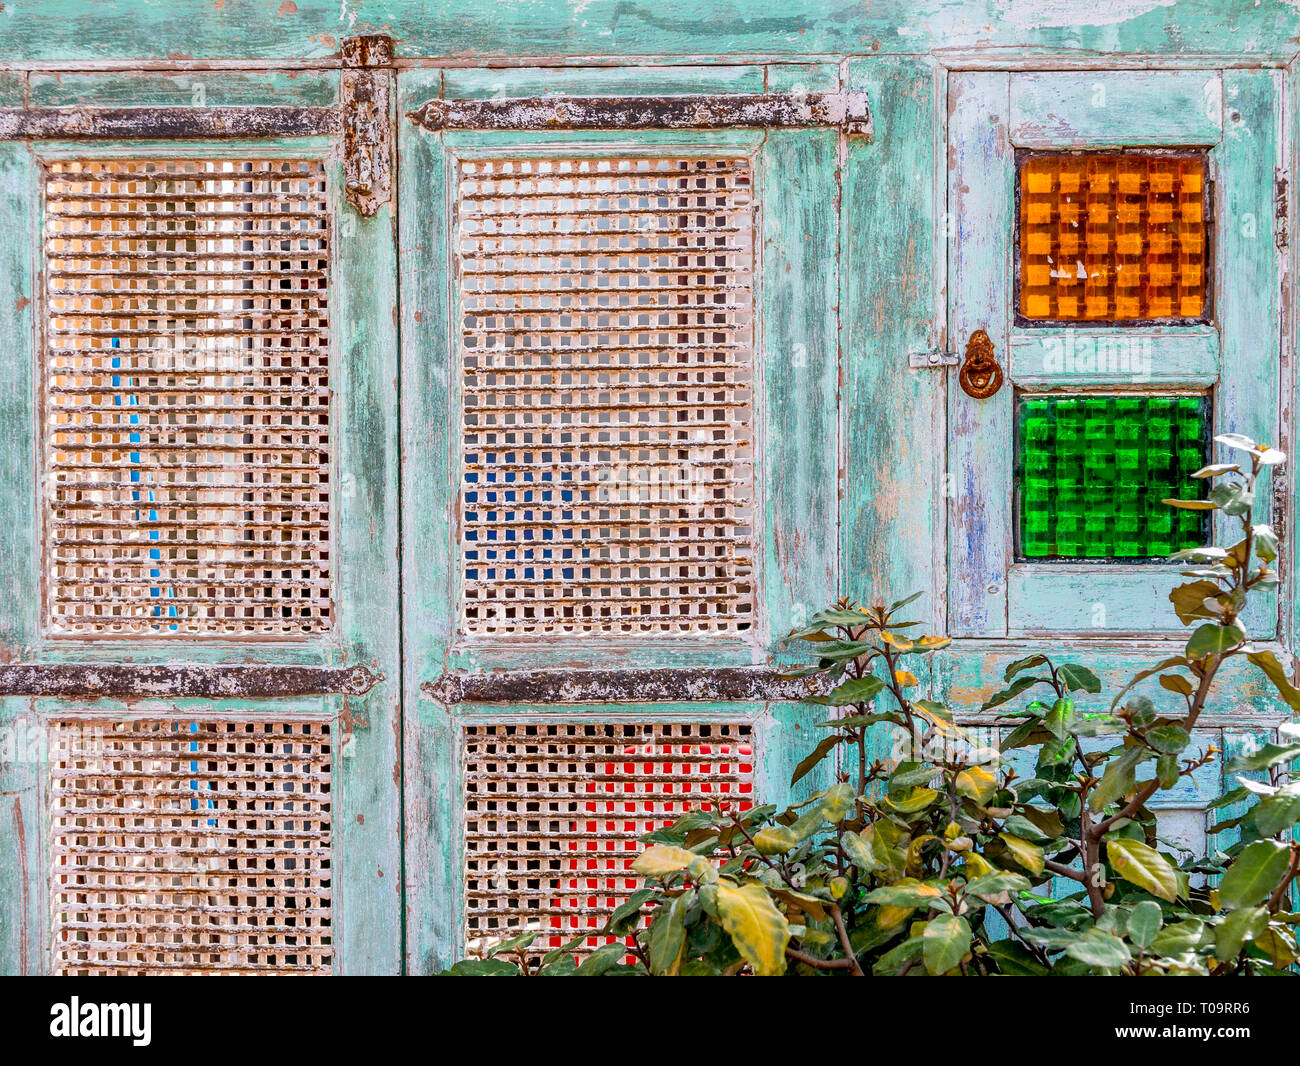 old cuban style wooden door with grid andd colorful windows Stock Photo